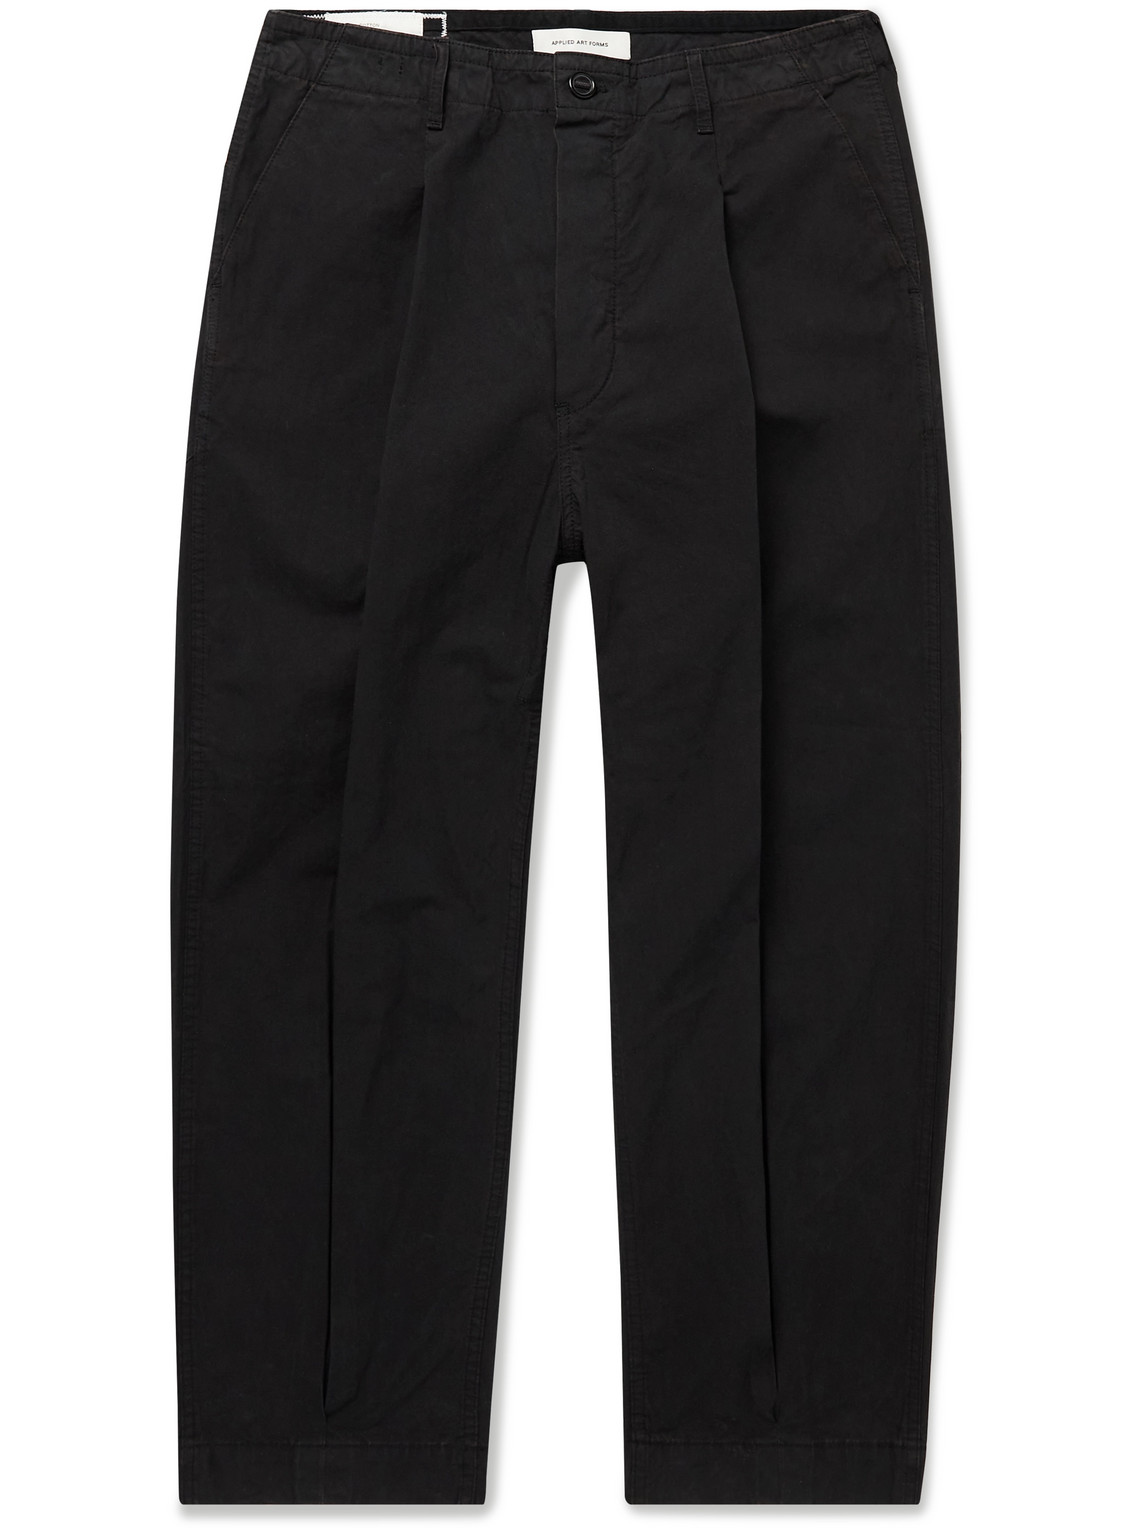 Applied Art Forms DM1-1 Tapered Pleated Cotton and CORDURA-Blend Trousers